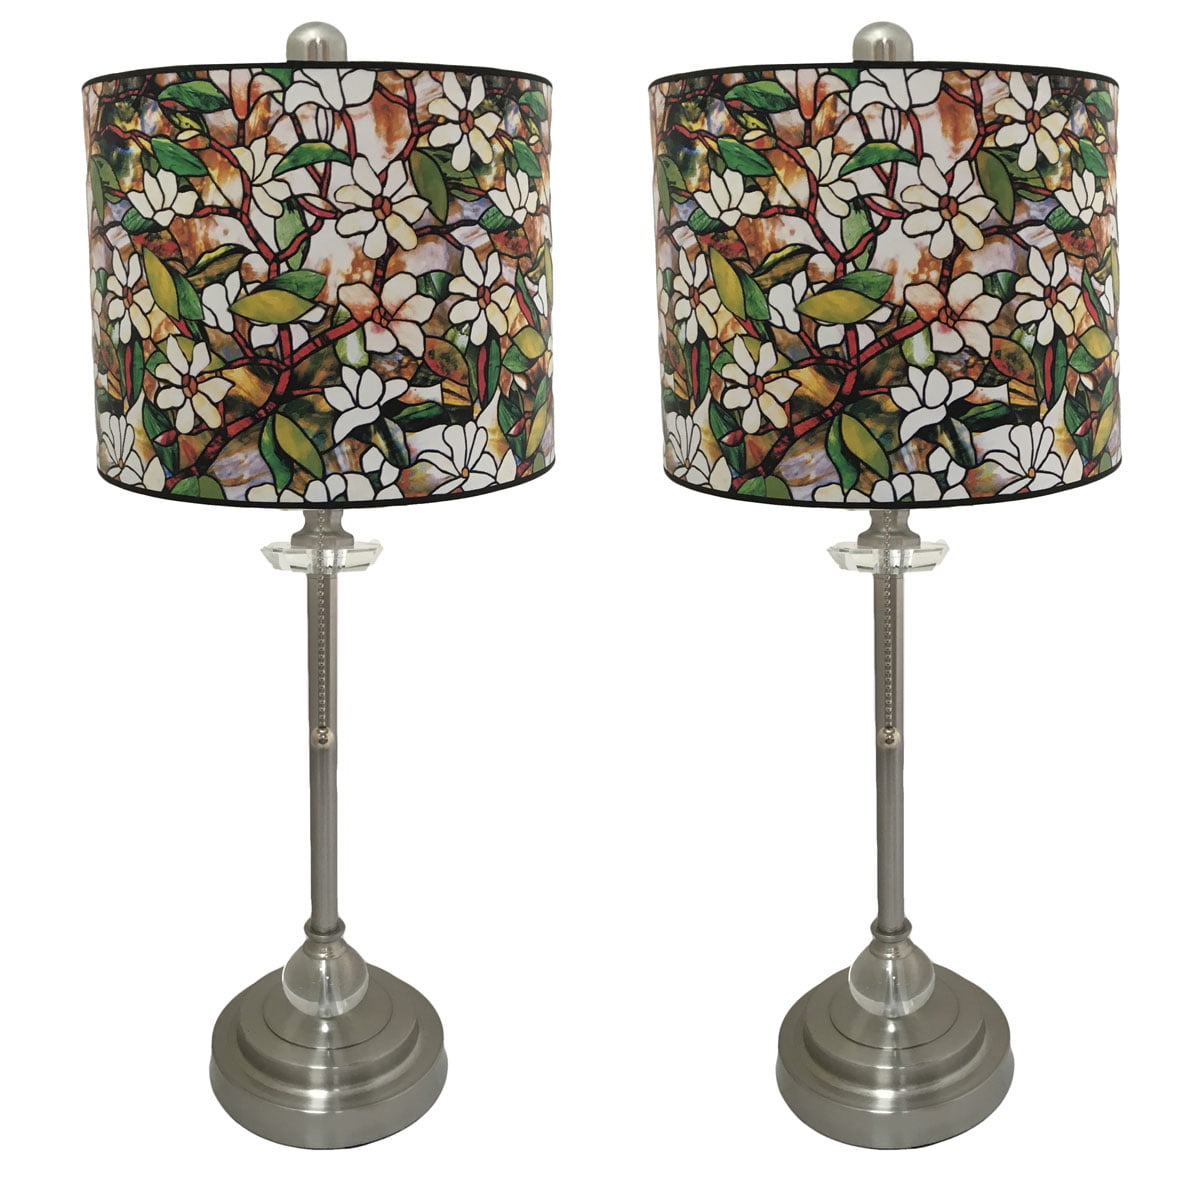 Royal Designs 28" Crystal and Brushed Nickel Buffet Lamp with Magnolia Stained Glass Design Hard Back Lamp Shade, Set of 2